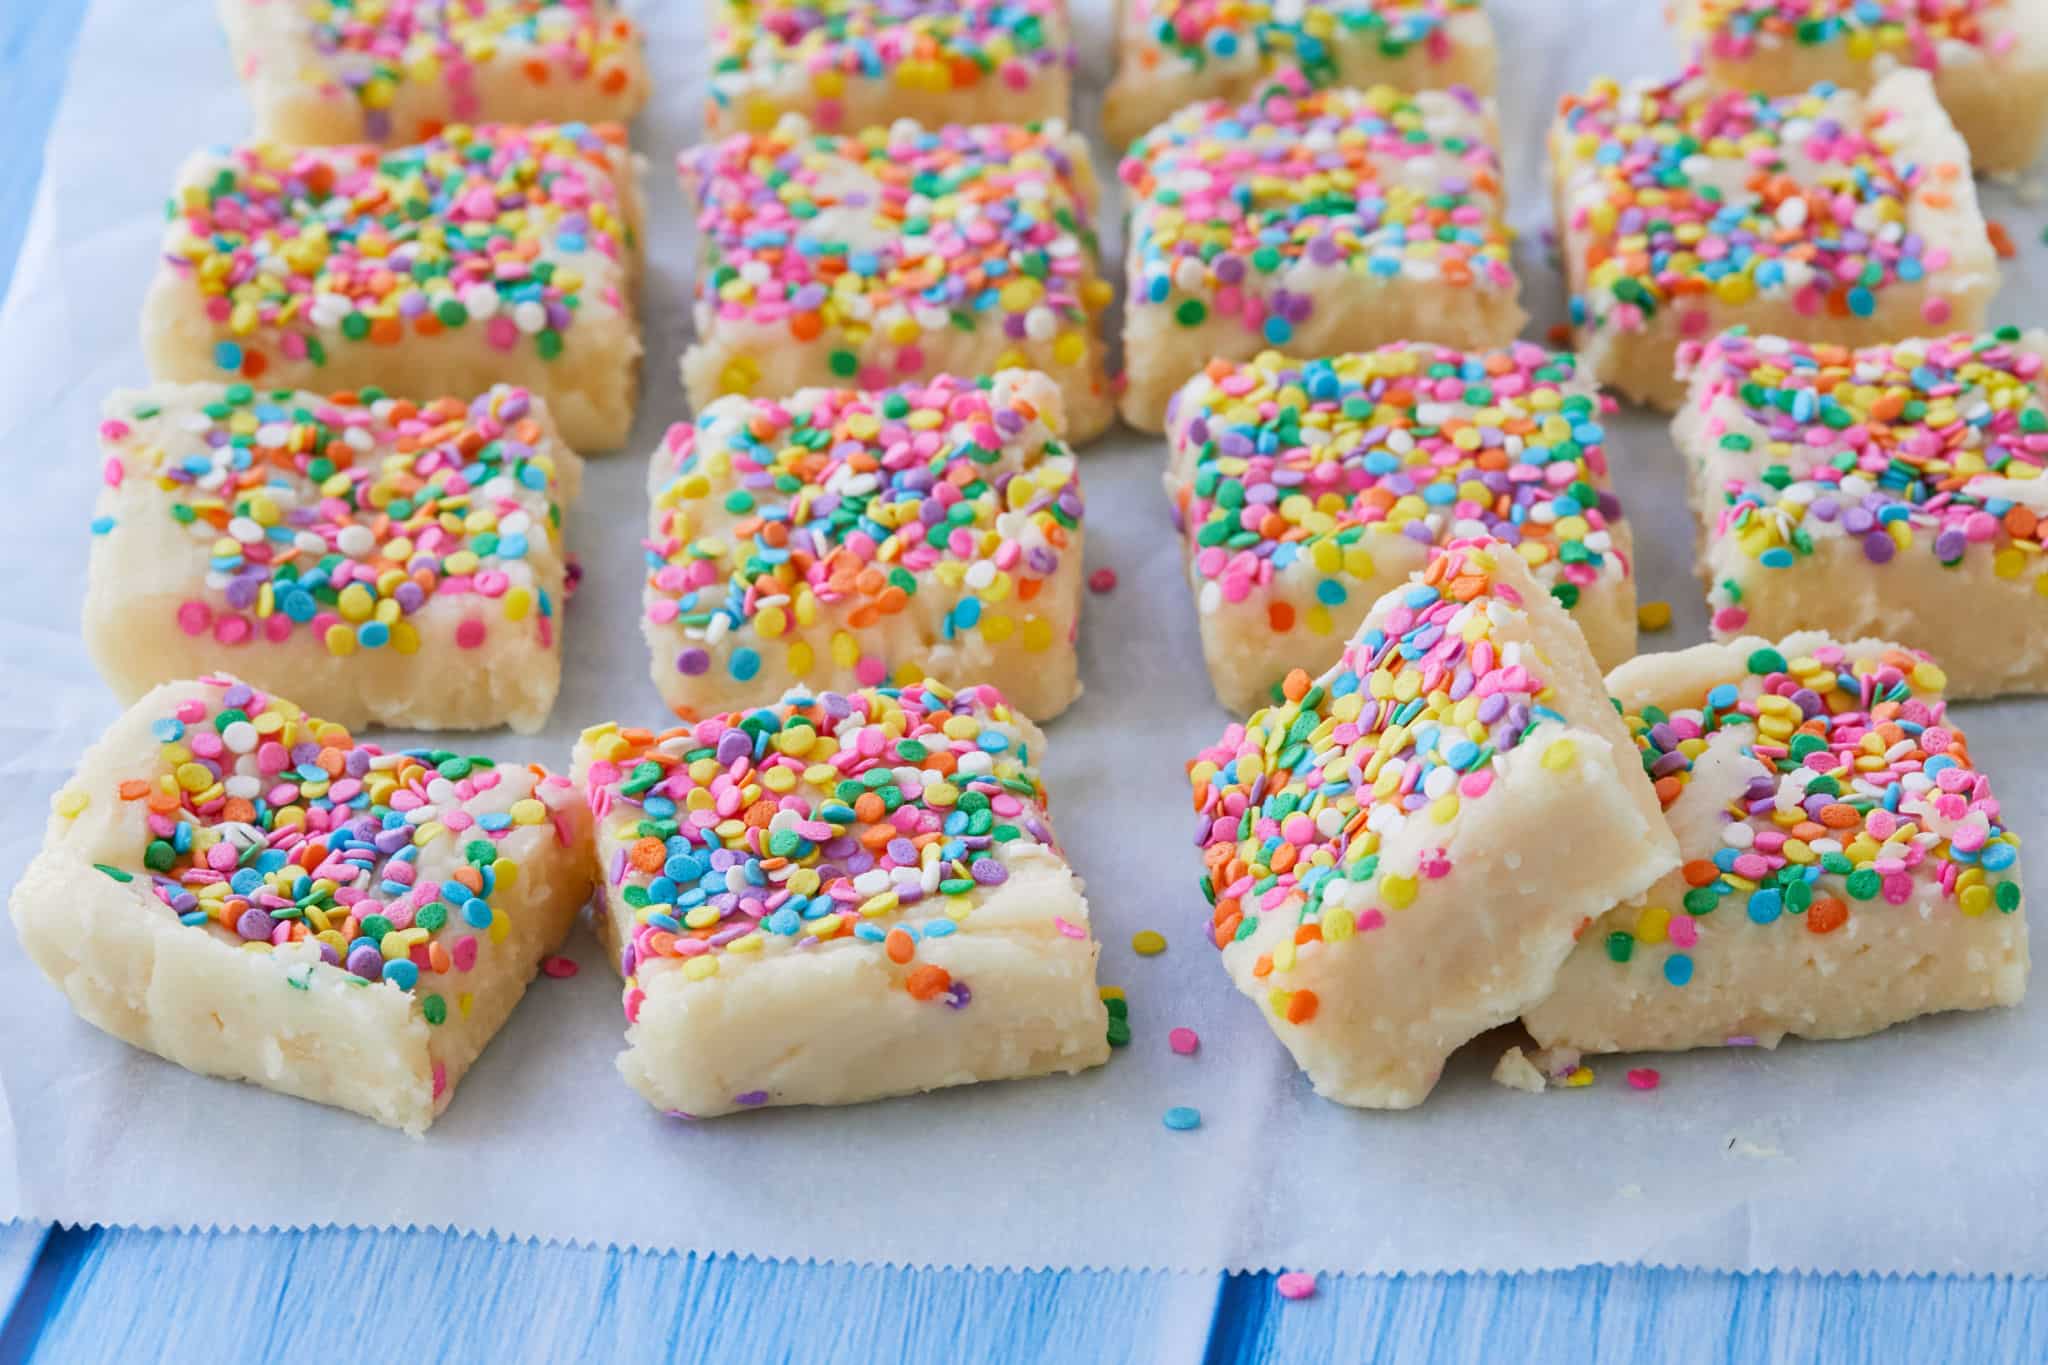 Homemade Birthday Cake Fudge is cut into squares and presented on parchment paper. The Funfetti Fudge is covered in rainbow sprinkles.